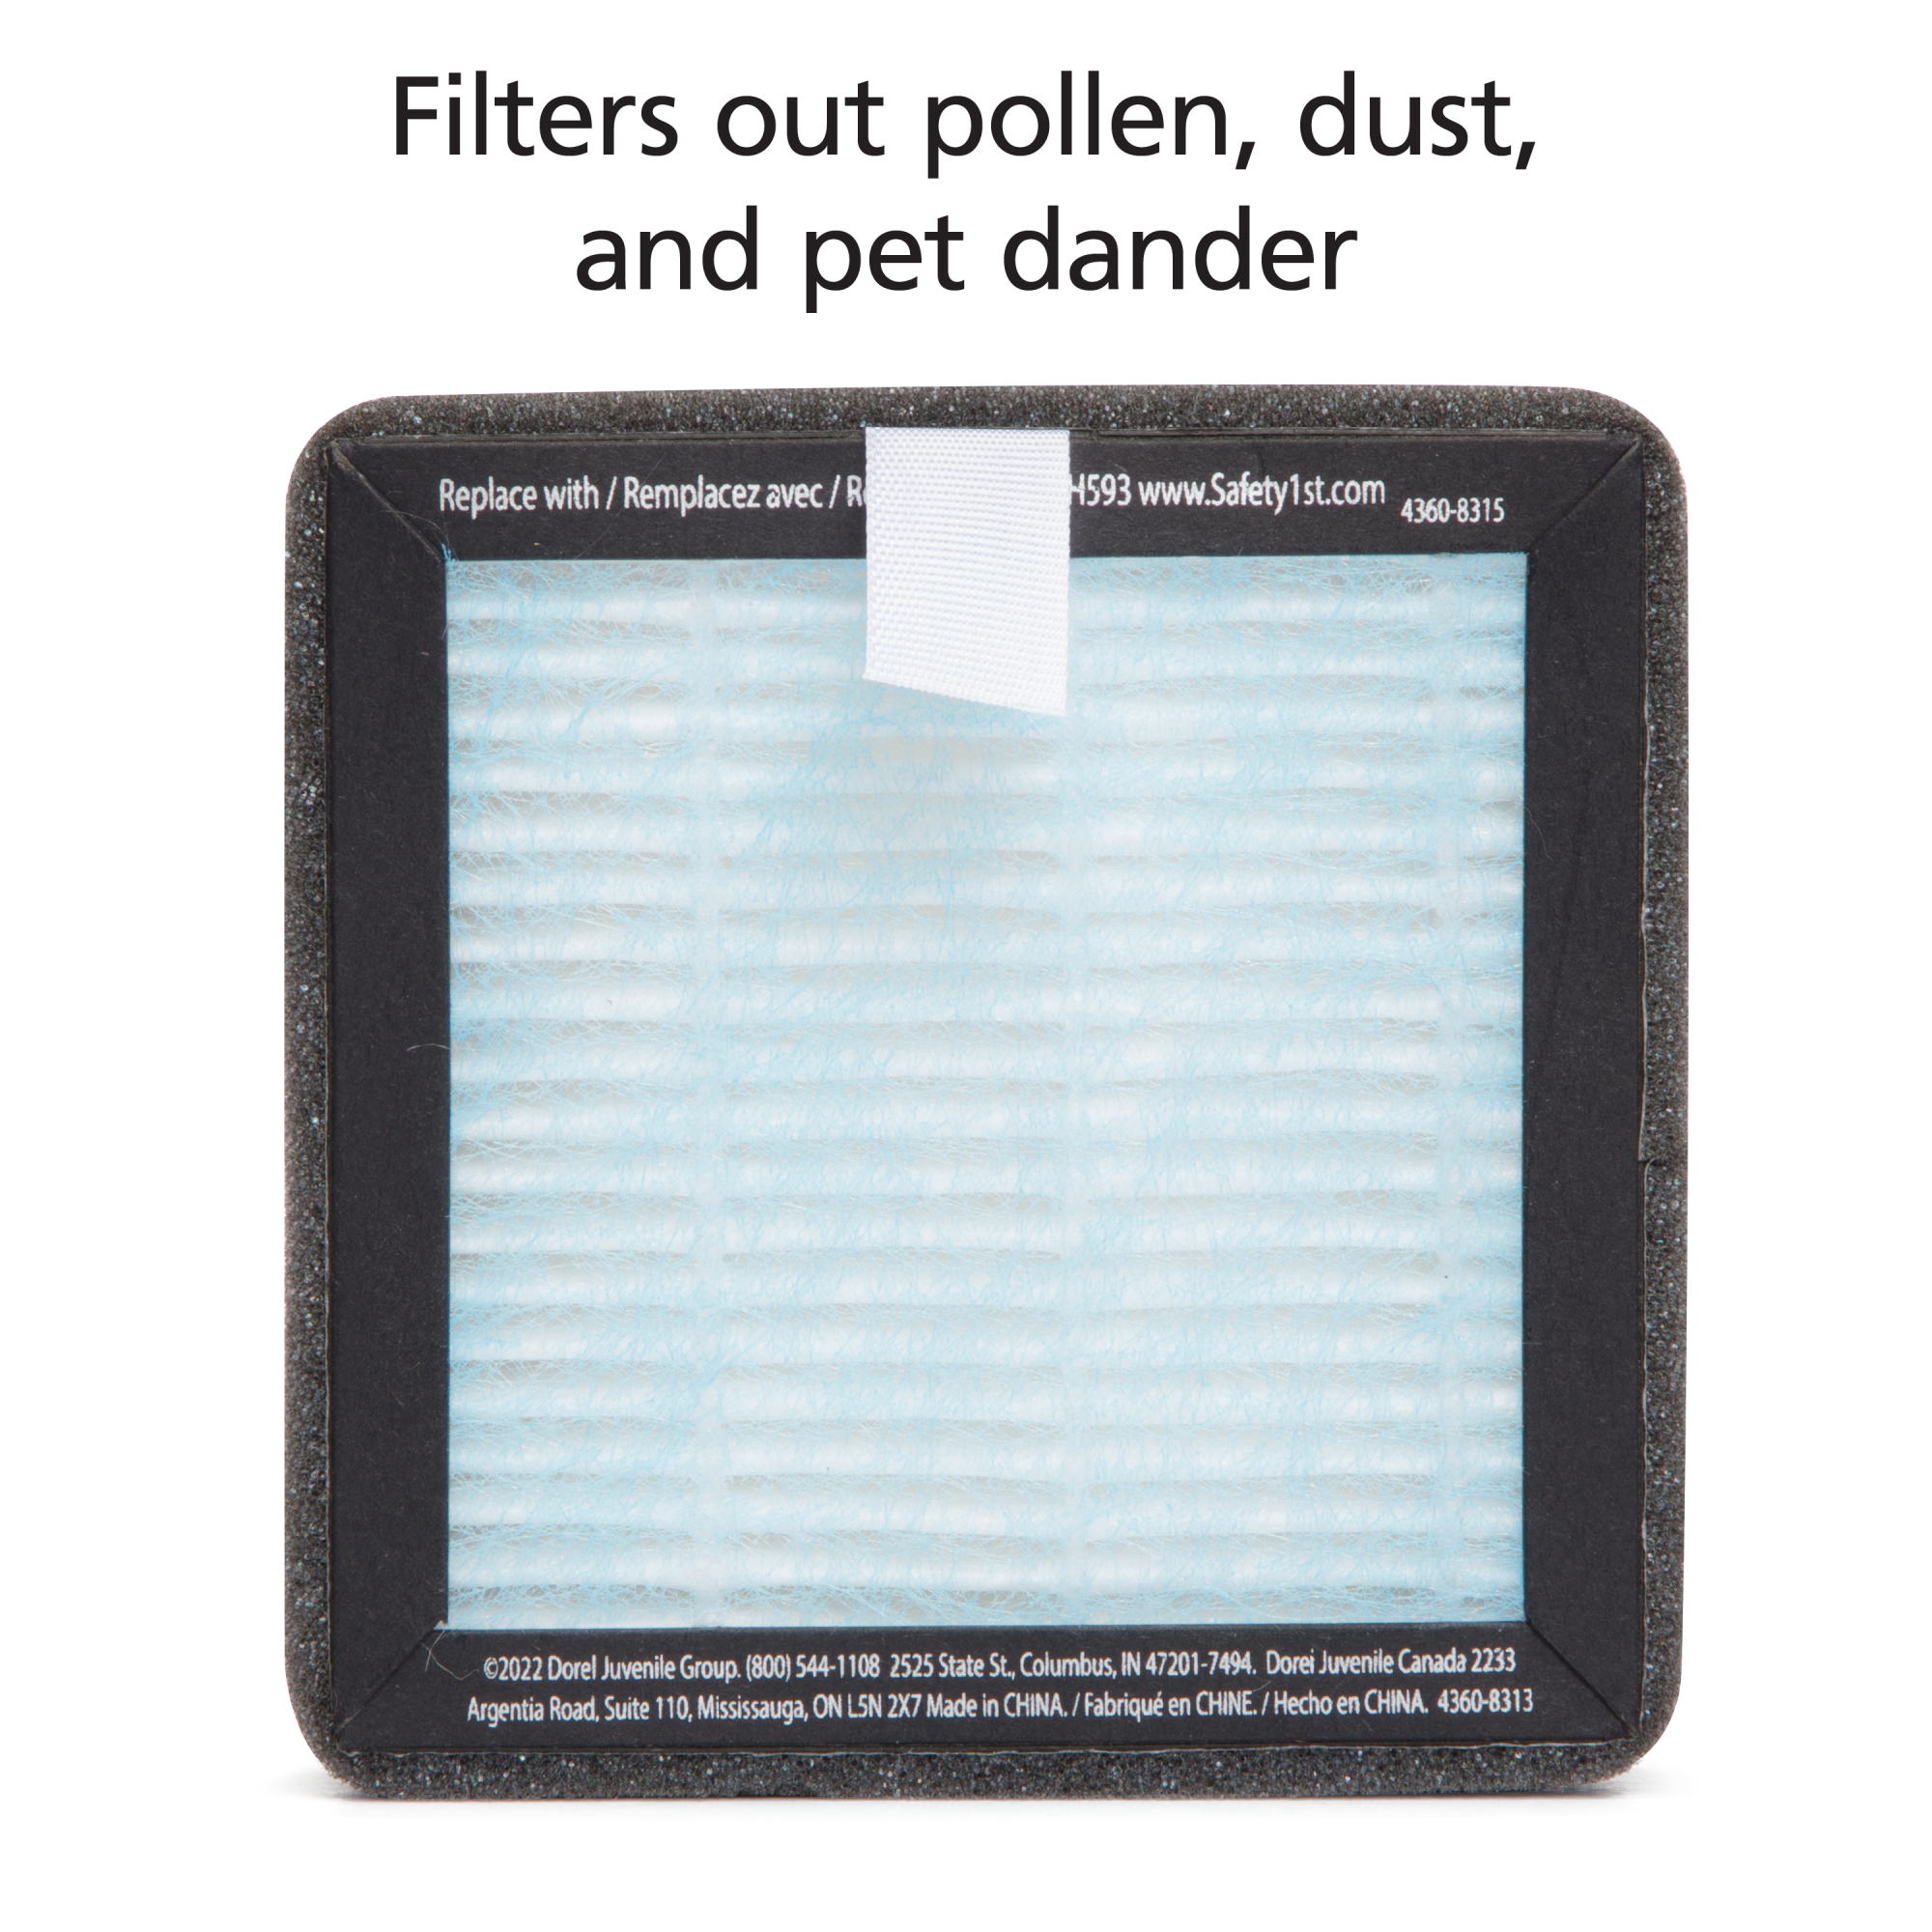 True HEPA Air Purifier Replacement Filter - filters out pollen, dust, and pet dander